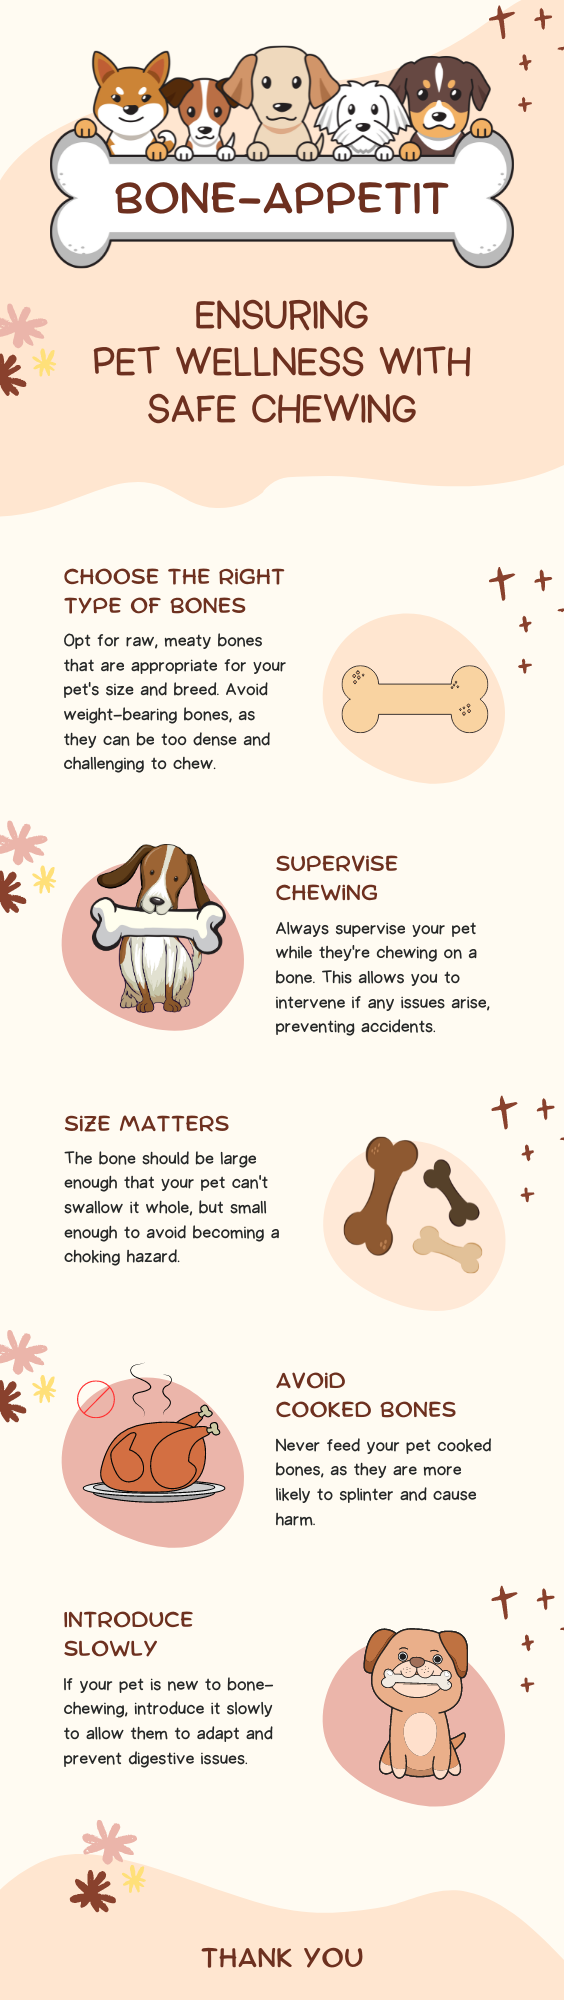 Bone-Appetit Ensuring Pet Wellness With Safe Chewing